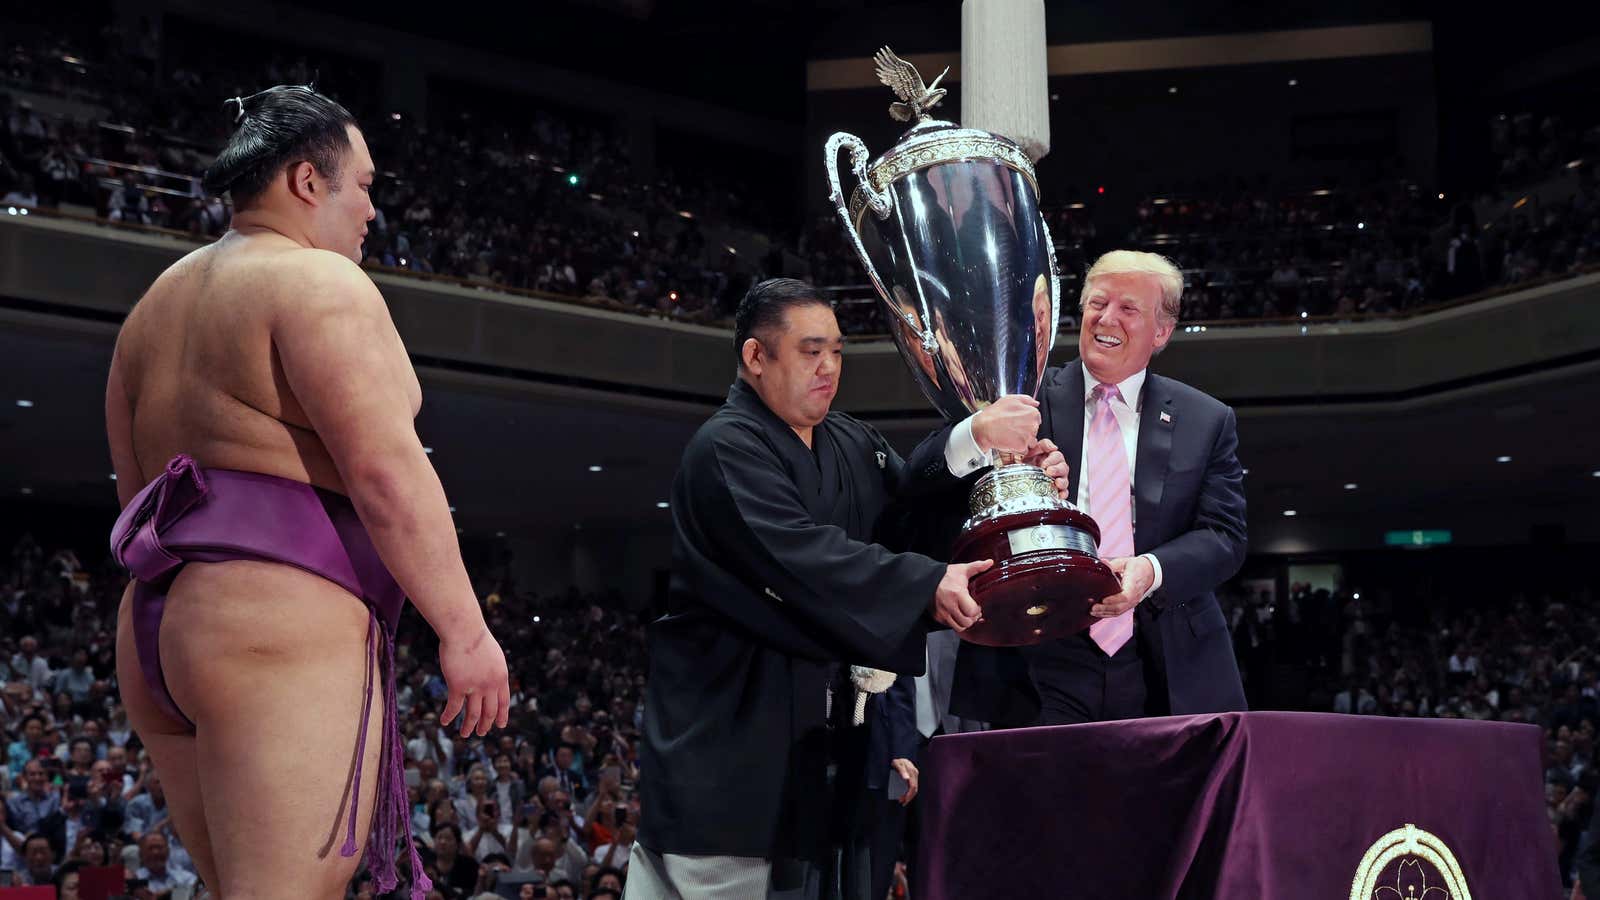 Trump Awards 'President's Cup' at Sumo Match in Japan